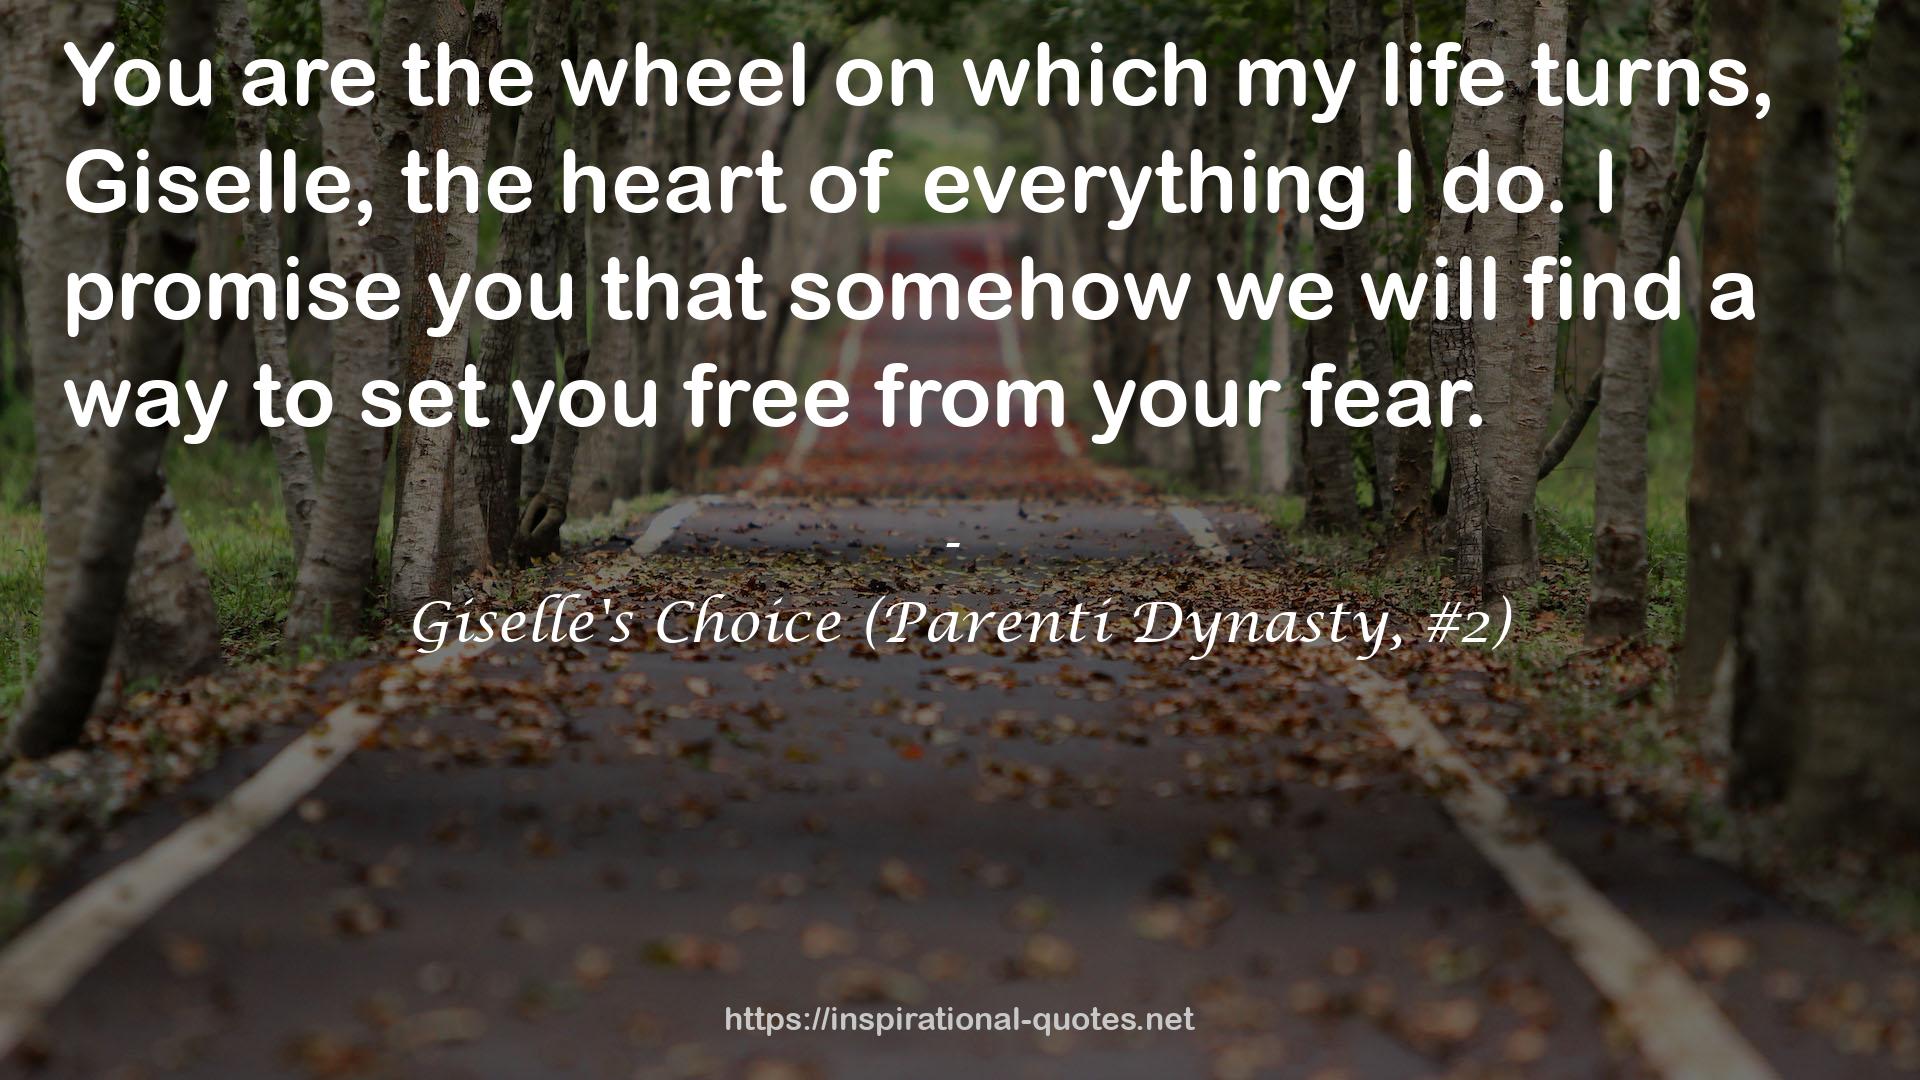 Giselle's Choice (Parenti Dynasty, #2) QUOTES